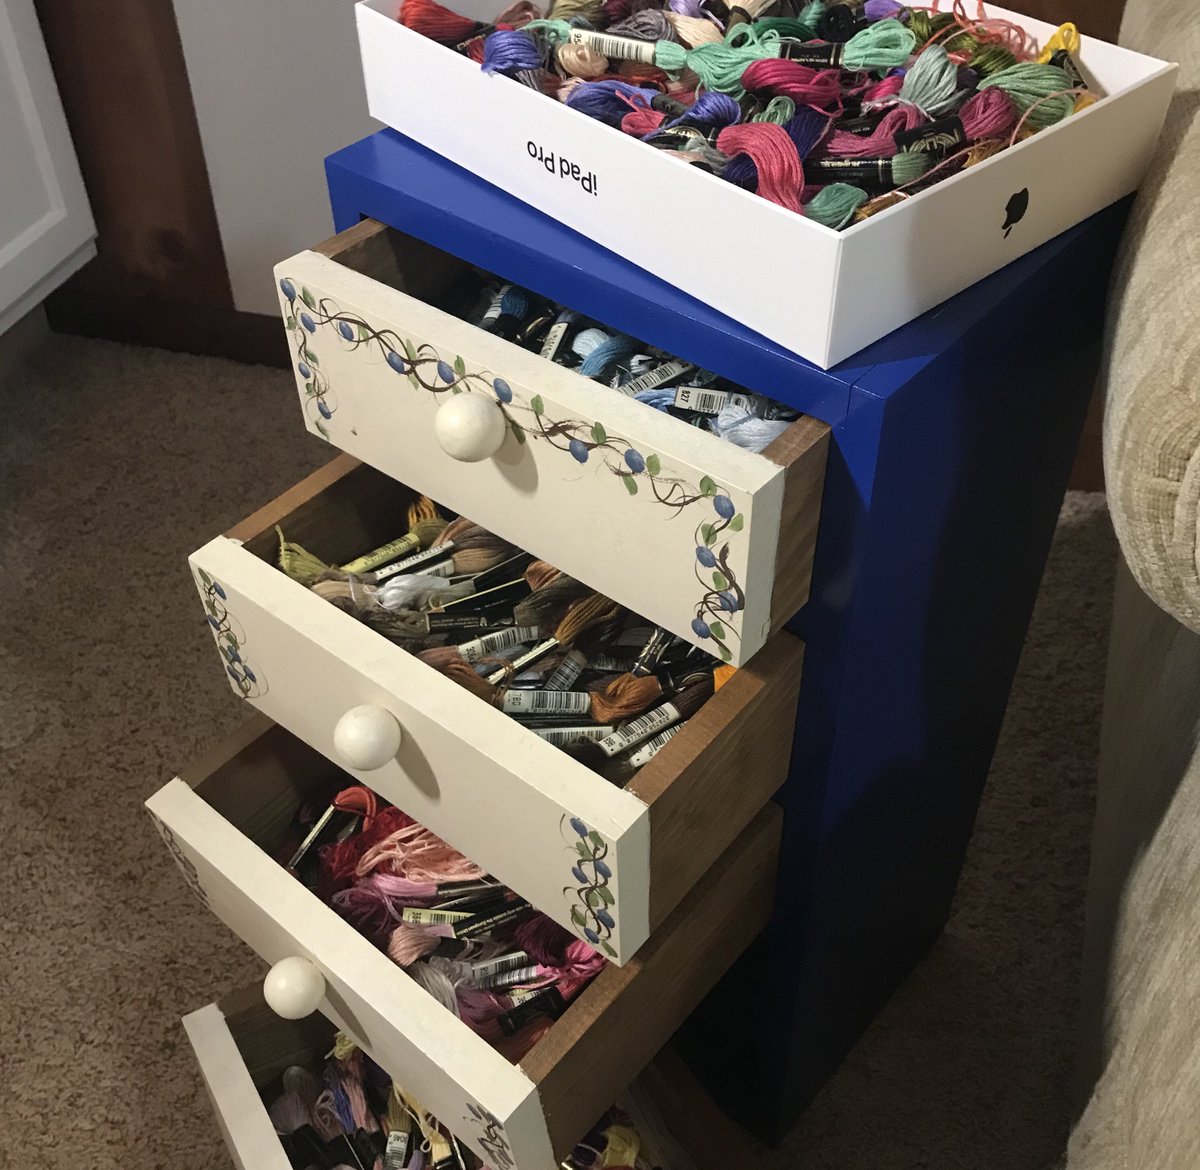 This is likely one of my next organization projects. There is more scattered around too.

#organization #embroideryfloss #thread #crafts #craft #organize #crafting #craftroom